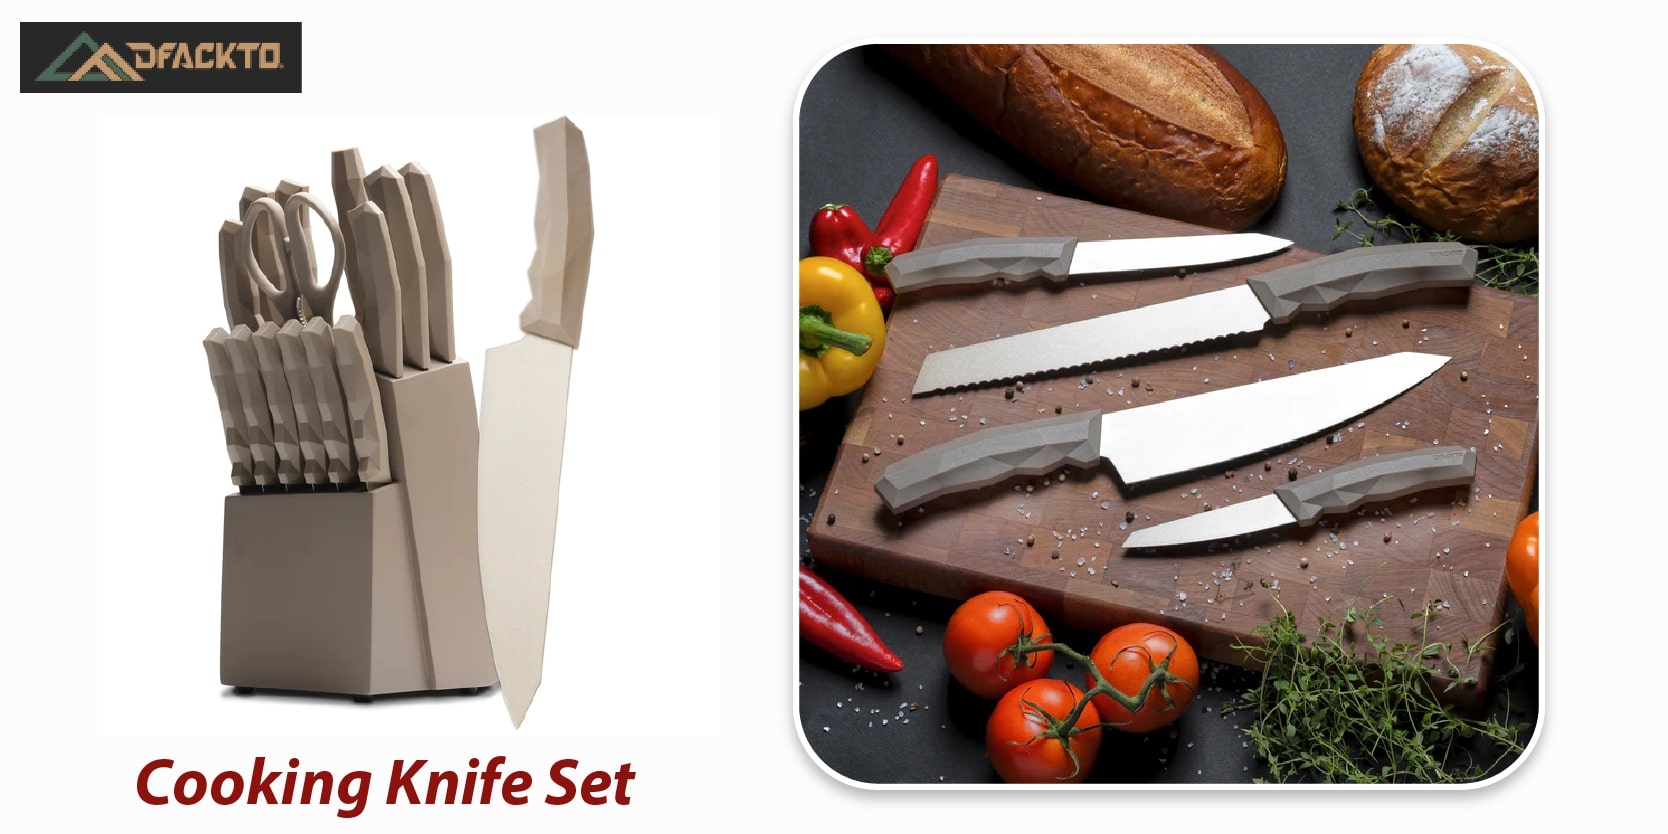 How do you know you are buying a valuable cooking knife set